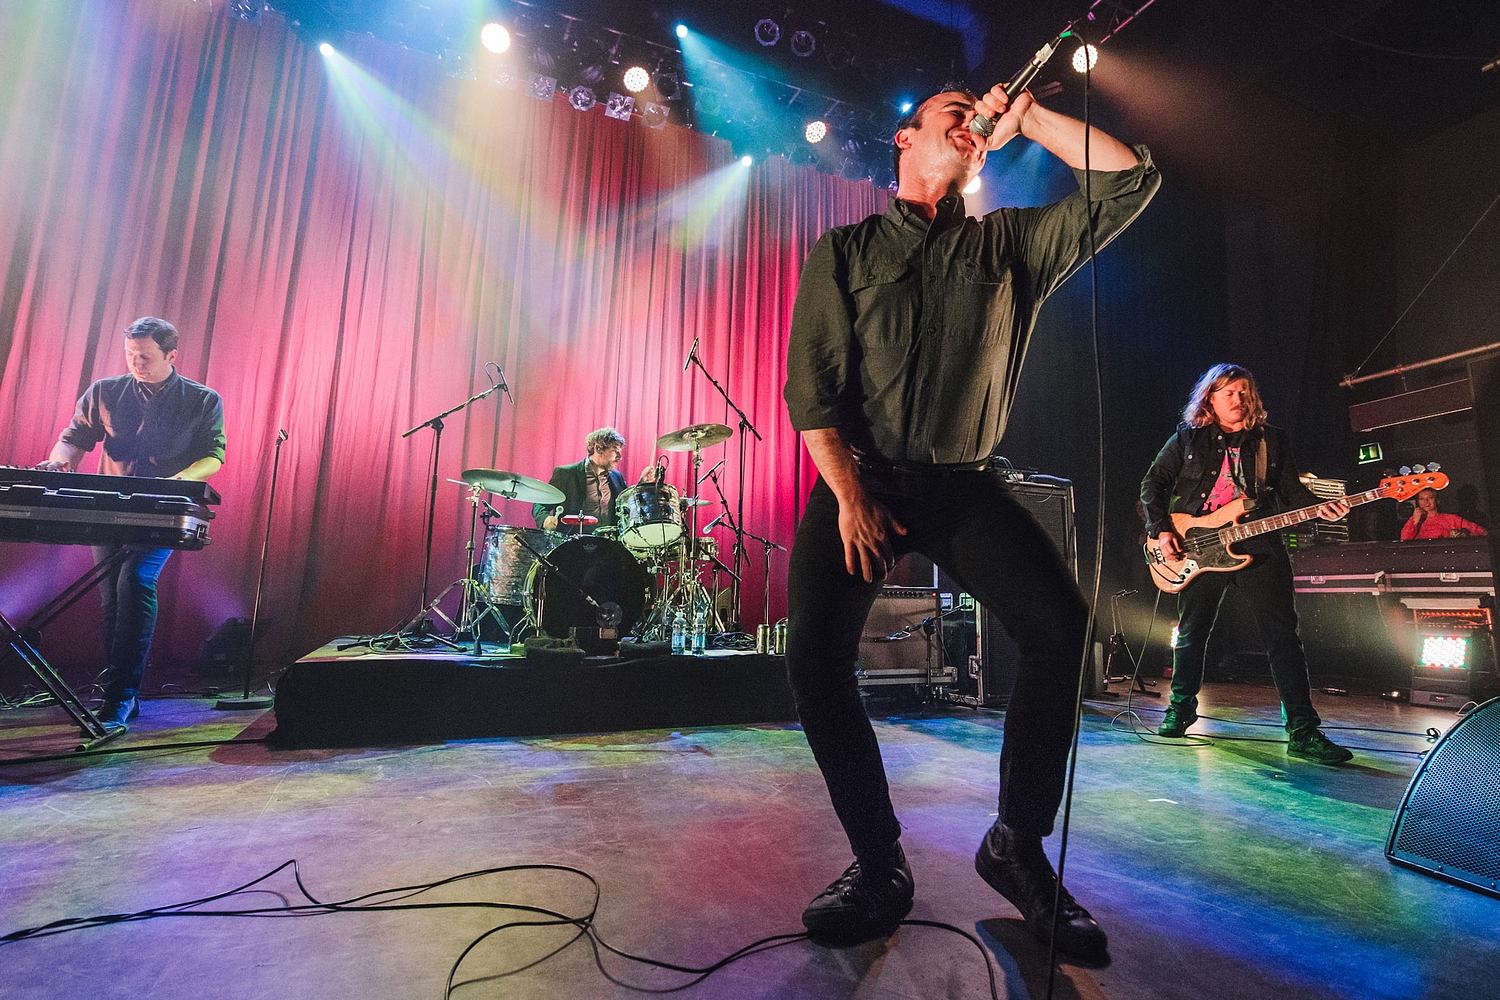 Future Islands are off on tour